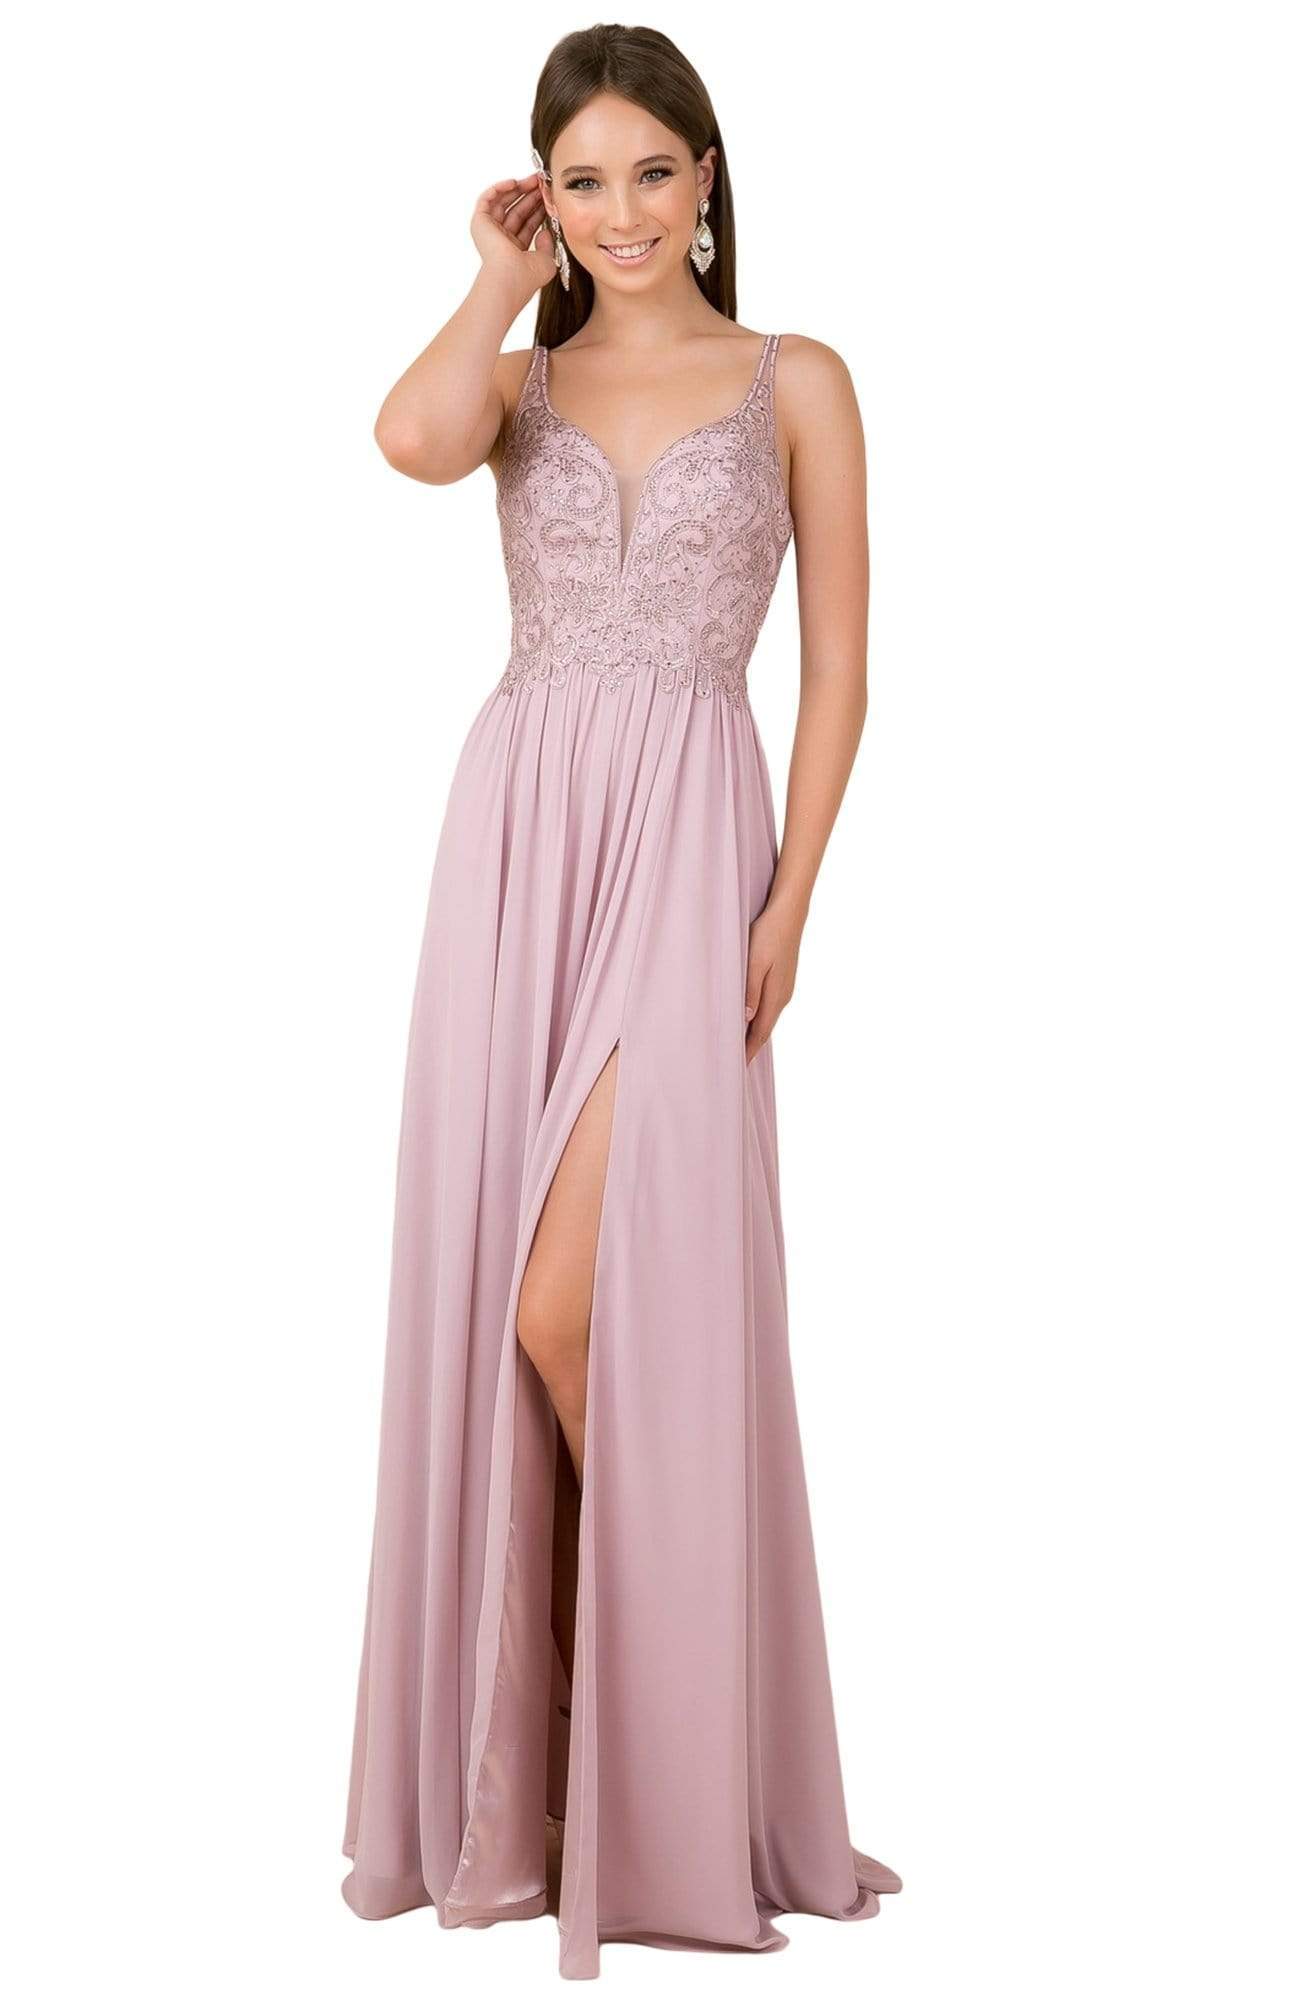 Nox Anabel - Y299 Sleeveless Beaded Lace Applique Bodice A-Line Gown Evening Dresses XS / Light Mauve